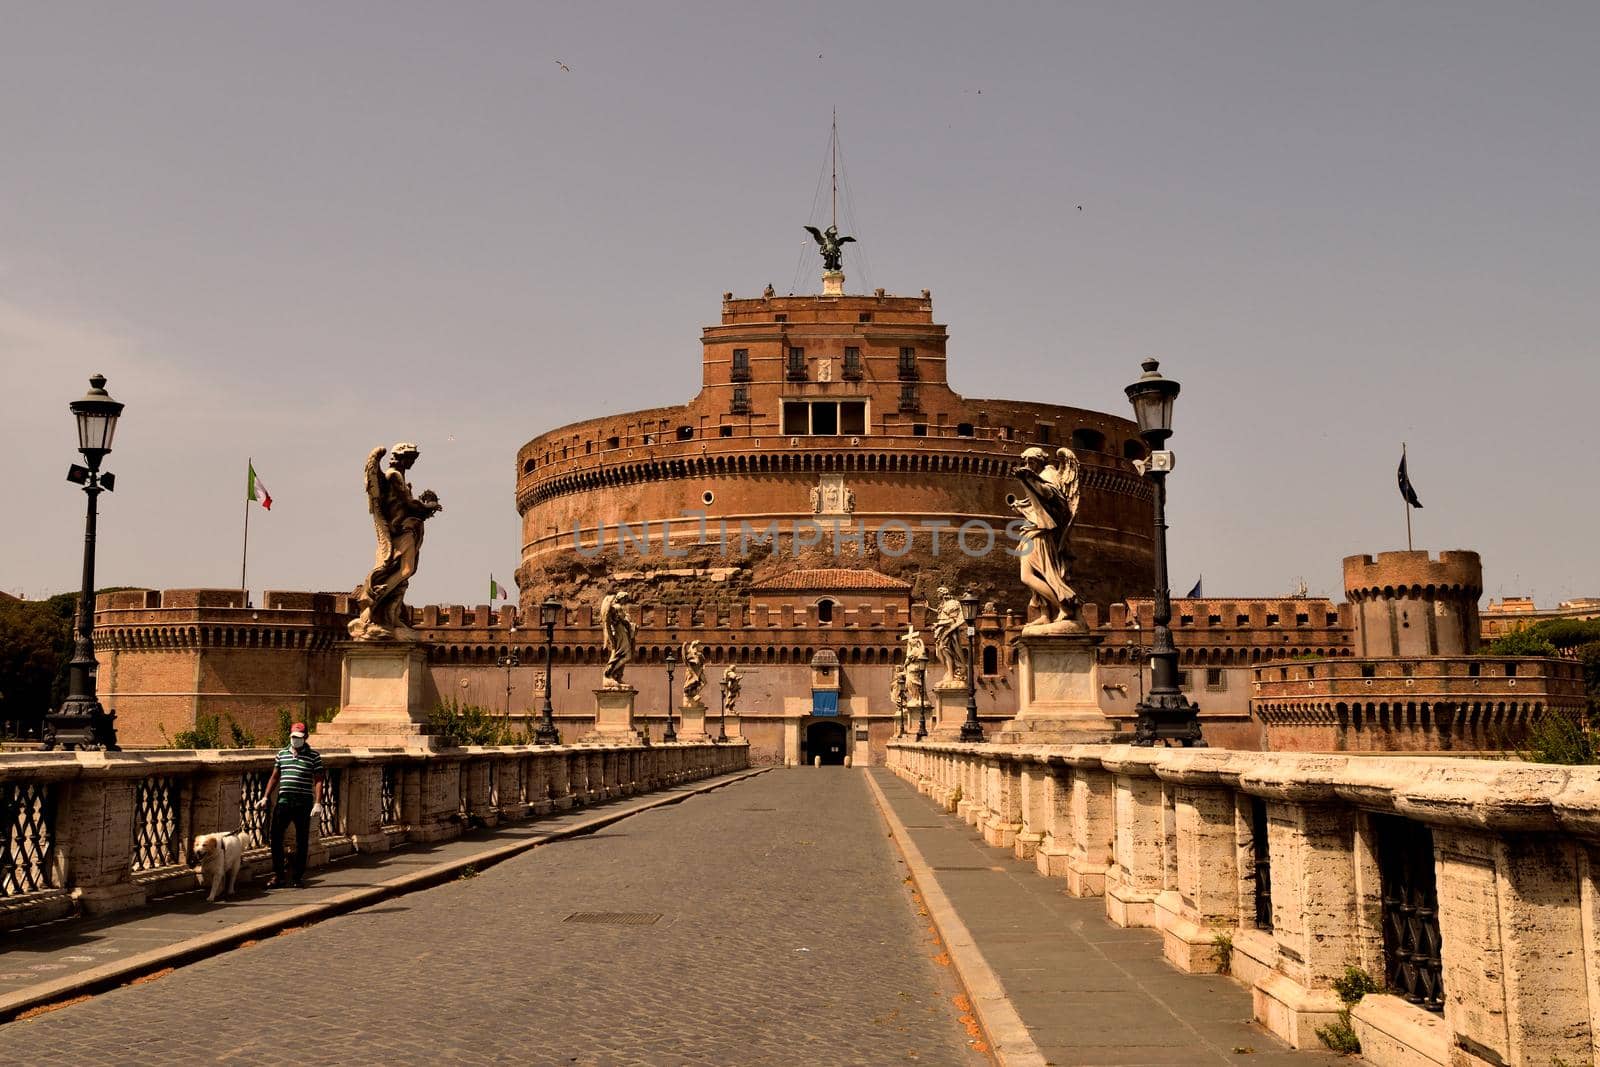 May 14th 2020, Rome, Italy: View of the Castel Sant'Angelo closed without tourists due to phase 2 of the lockdown